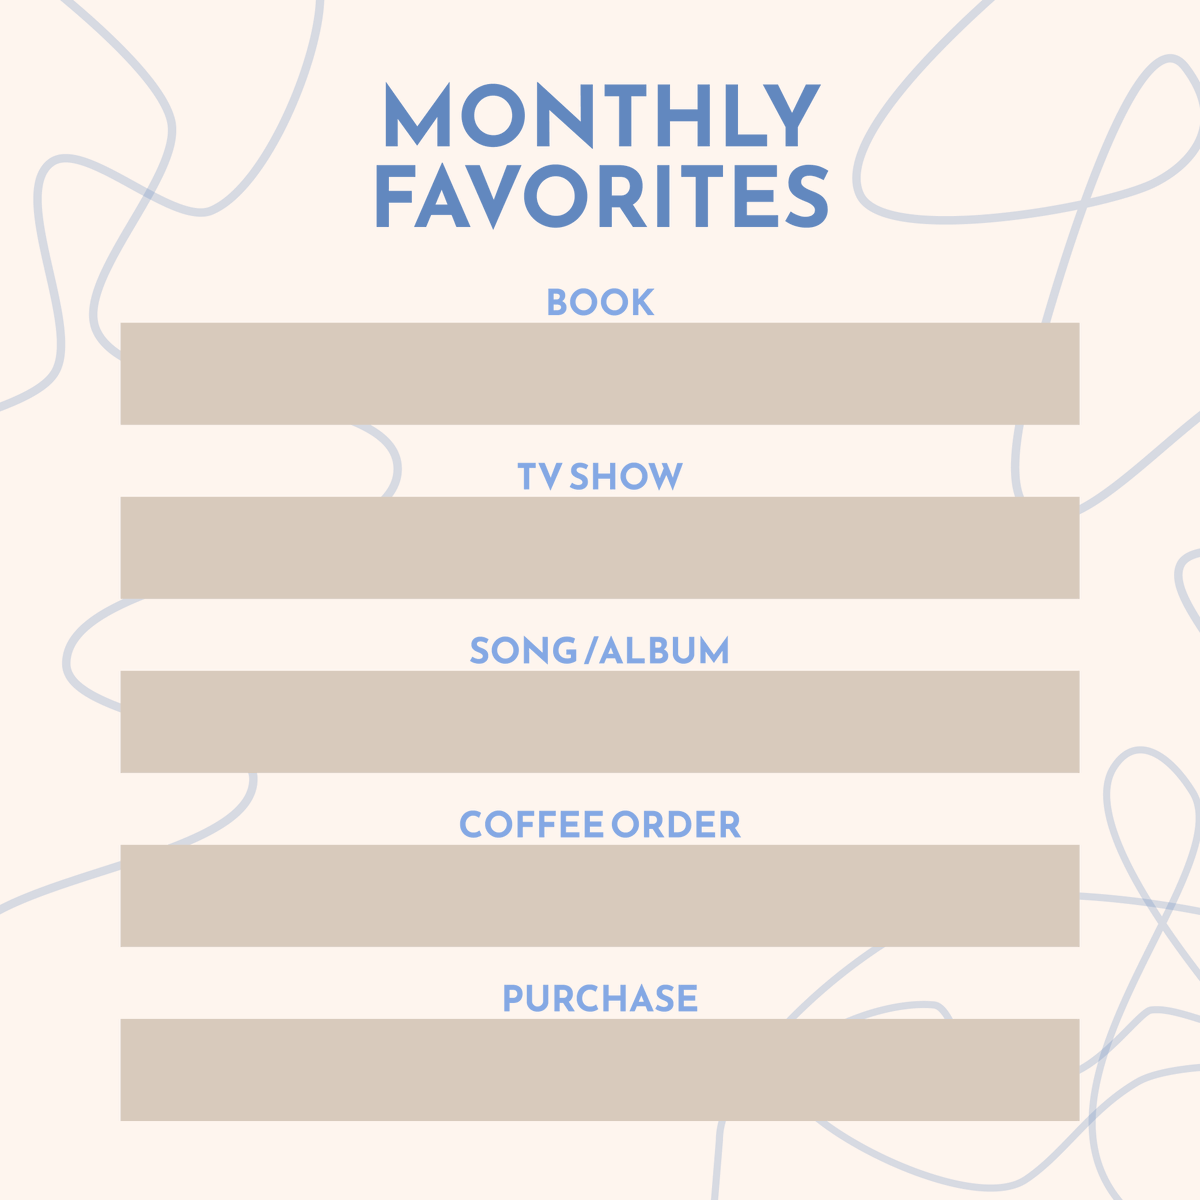 What are a few things you've been loving this month? #MonthlyFavorites
#vacosells #vacowillhelpyoubuy #virginiacountryrealestate